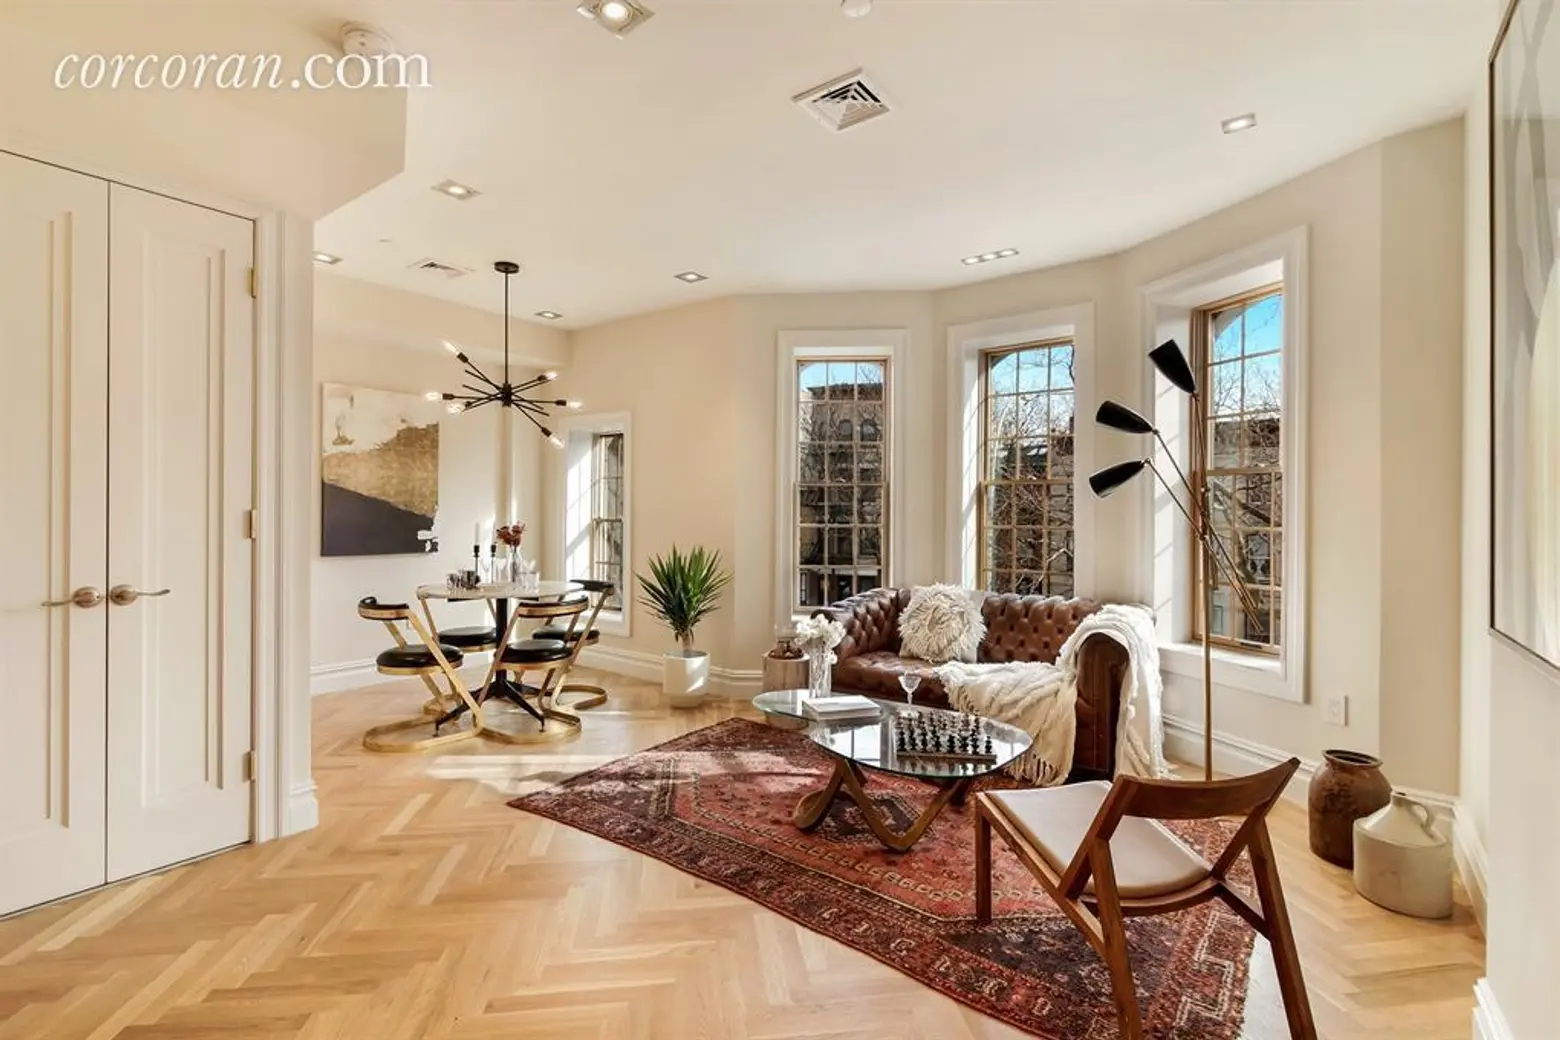 Glamorous modern condo inside a historic Bed-Stuy townhouse asks $855K